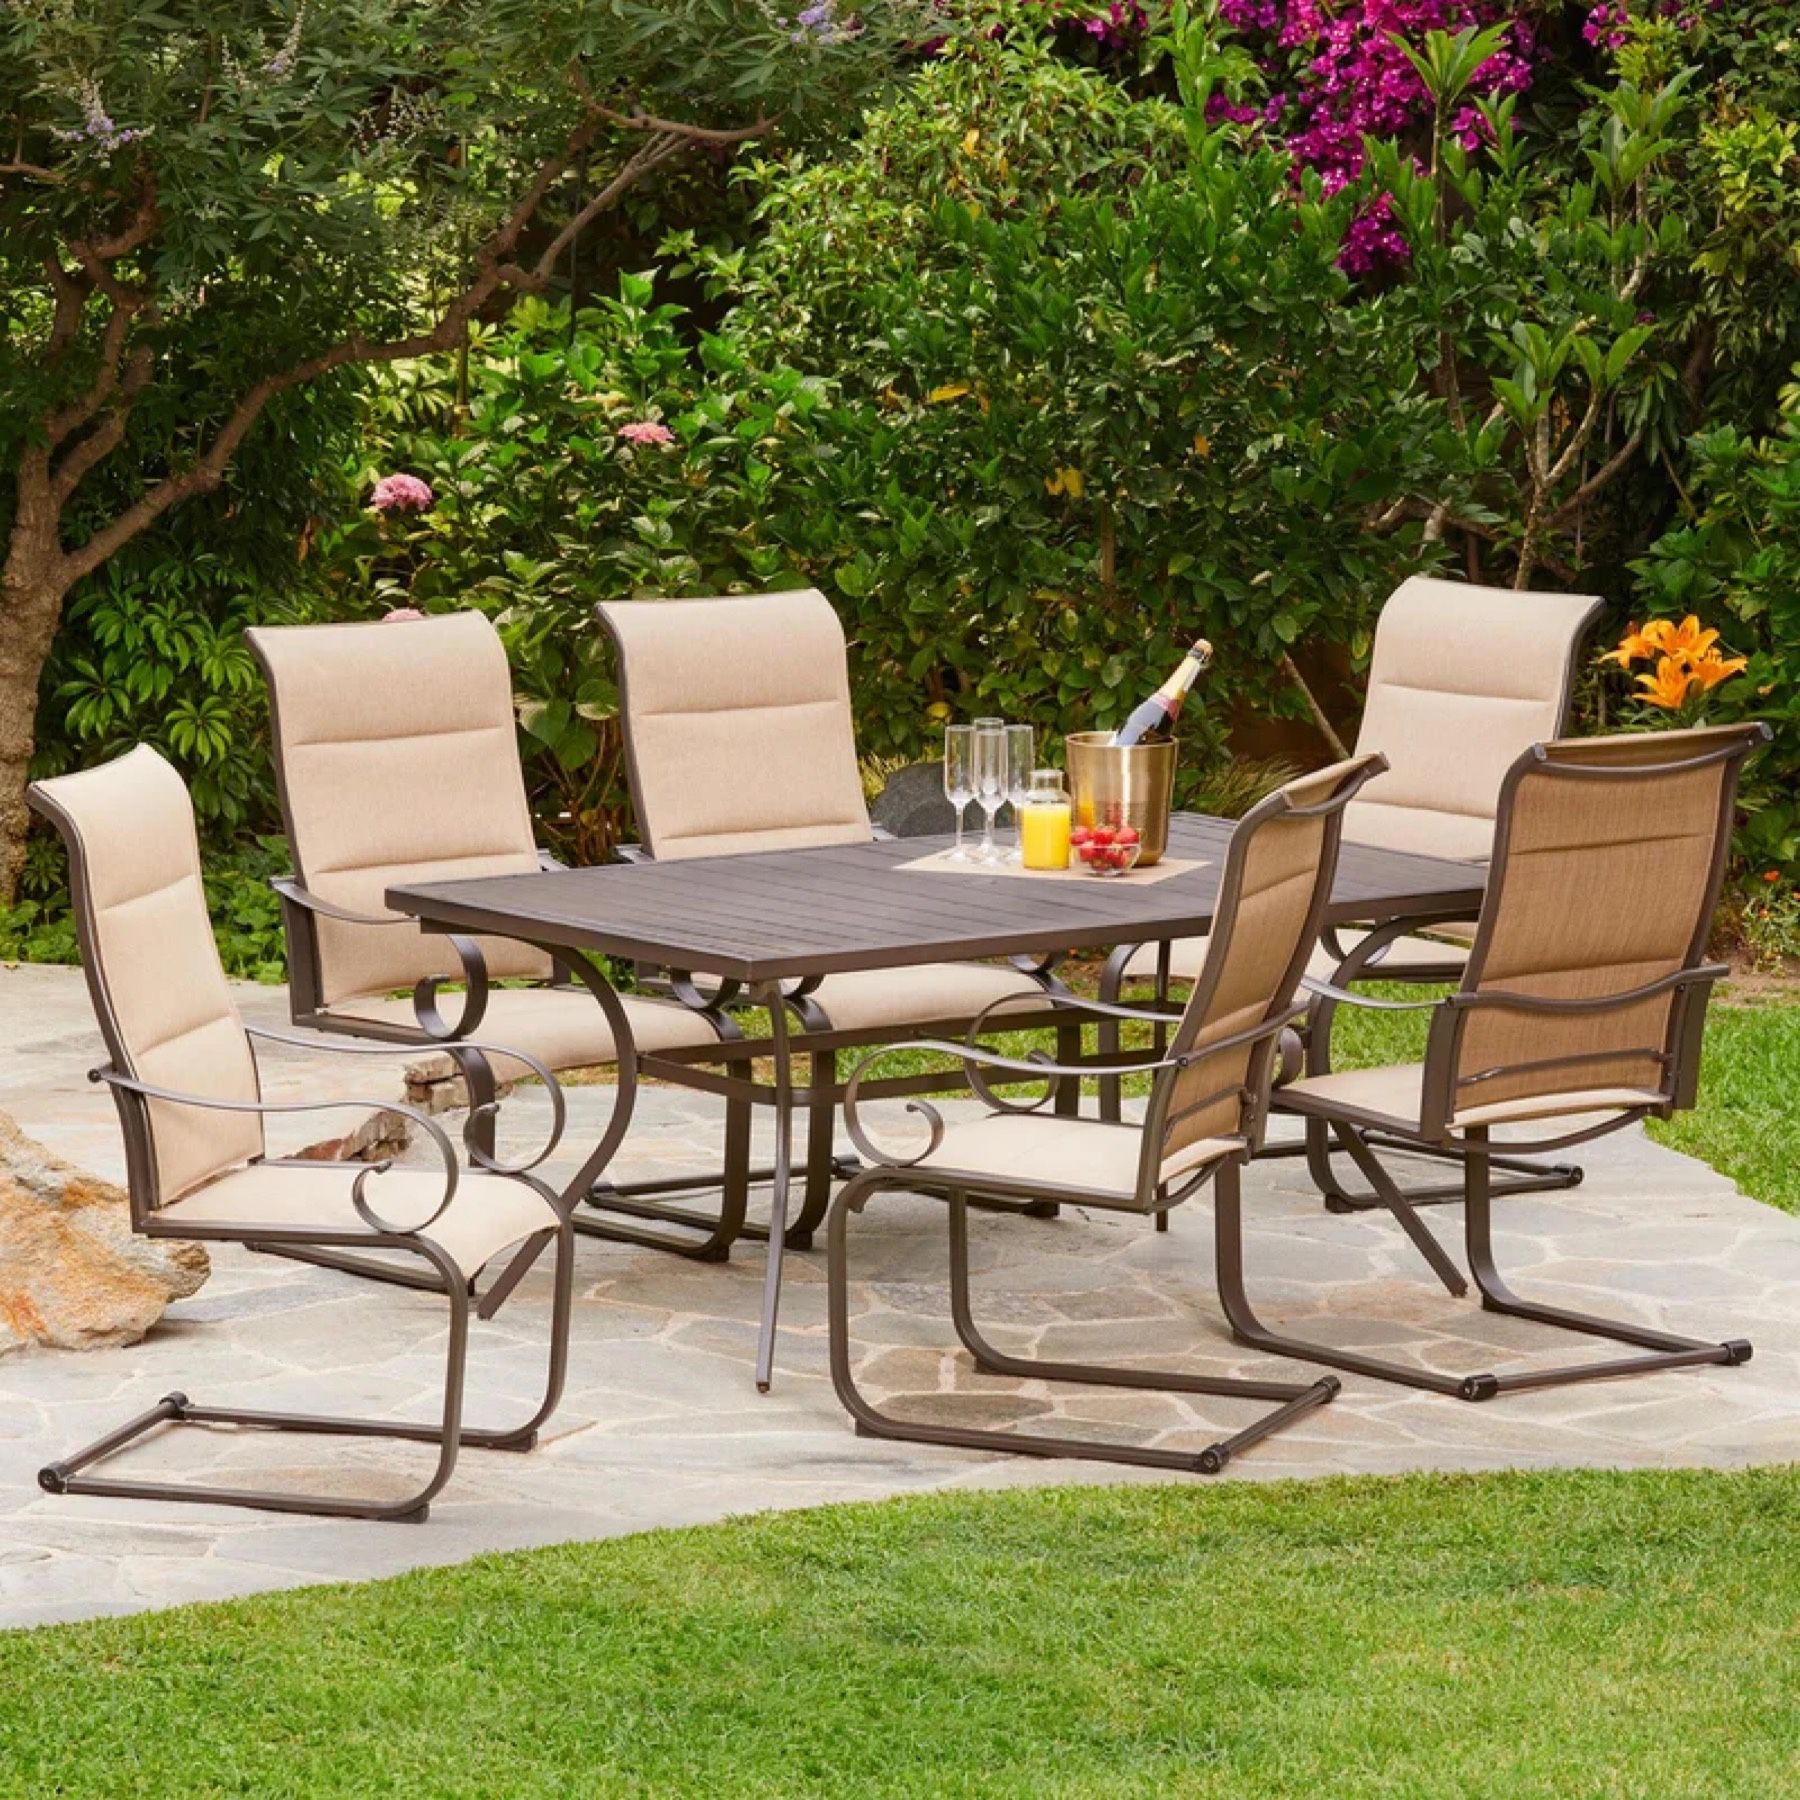 Outdoor Furniture, Dining Table, Patio Set